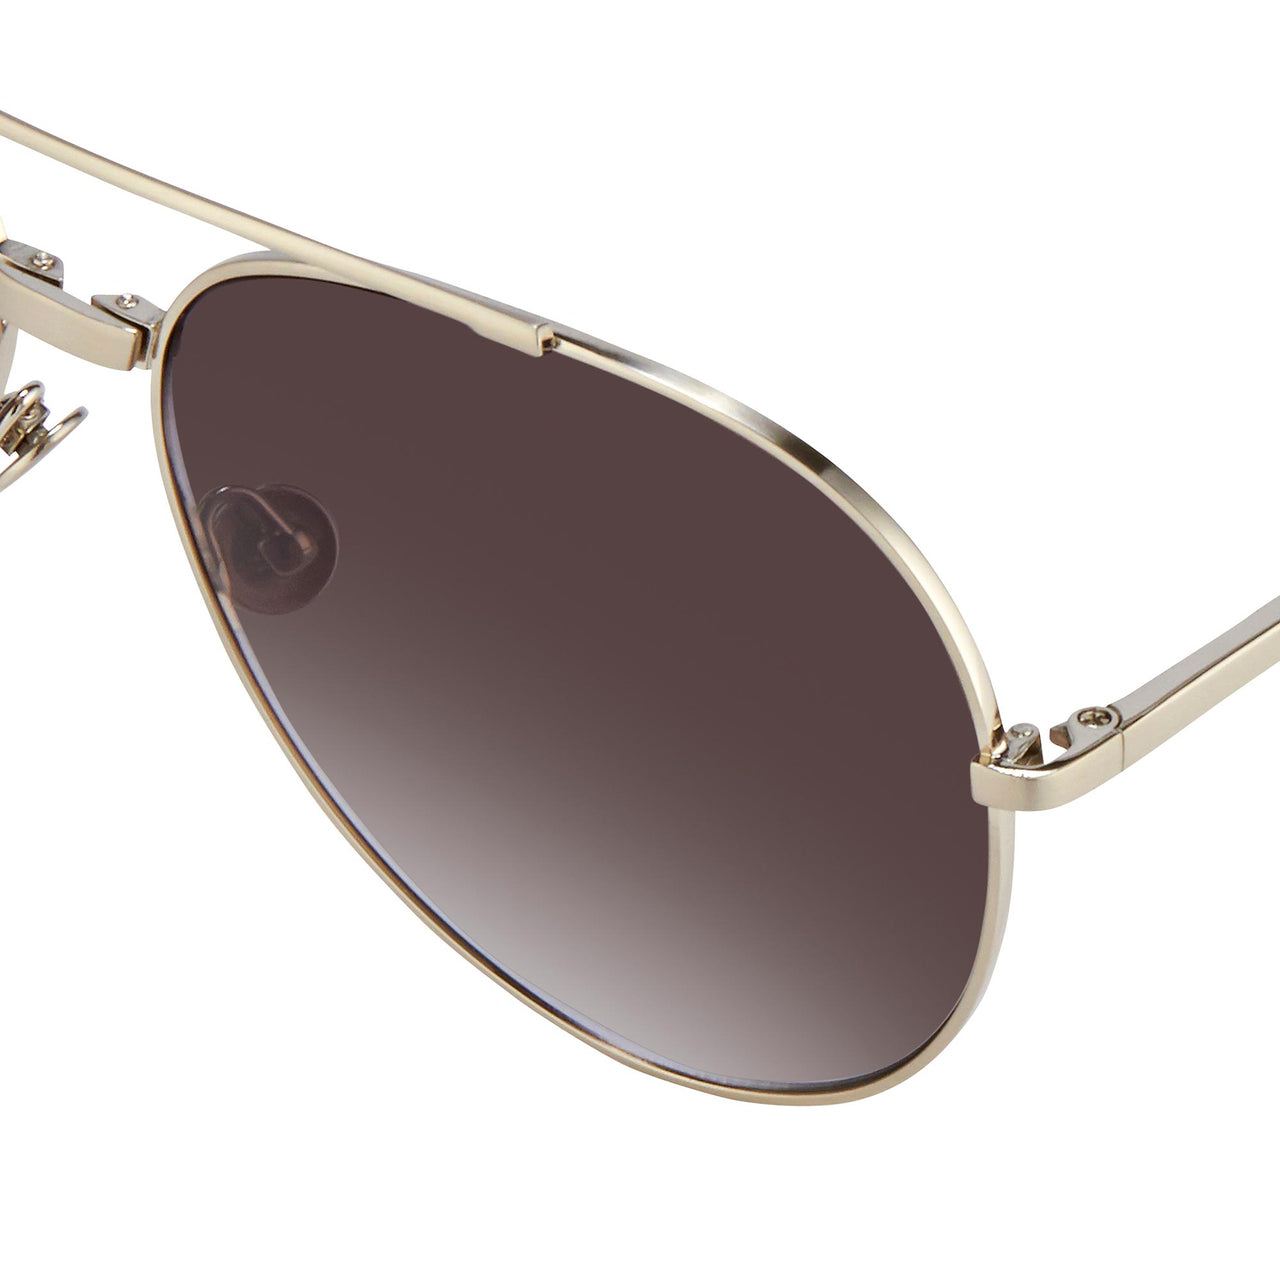 Ann Demeulemeester Sunglasses 925 Silver Titanium with Grey Lenses AD14C1SUN - Watches & Crystals